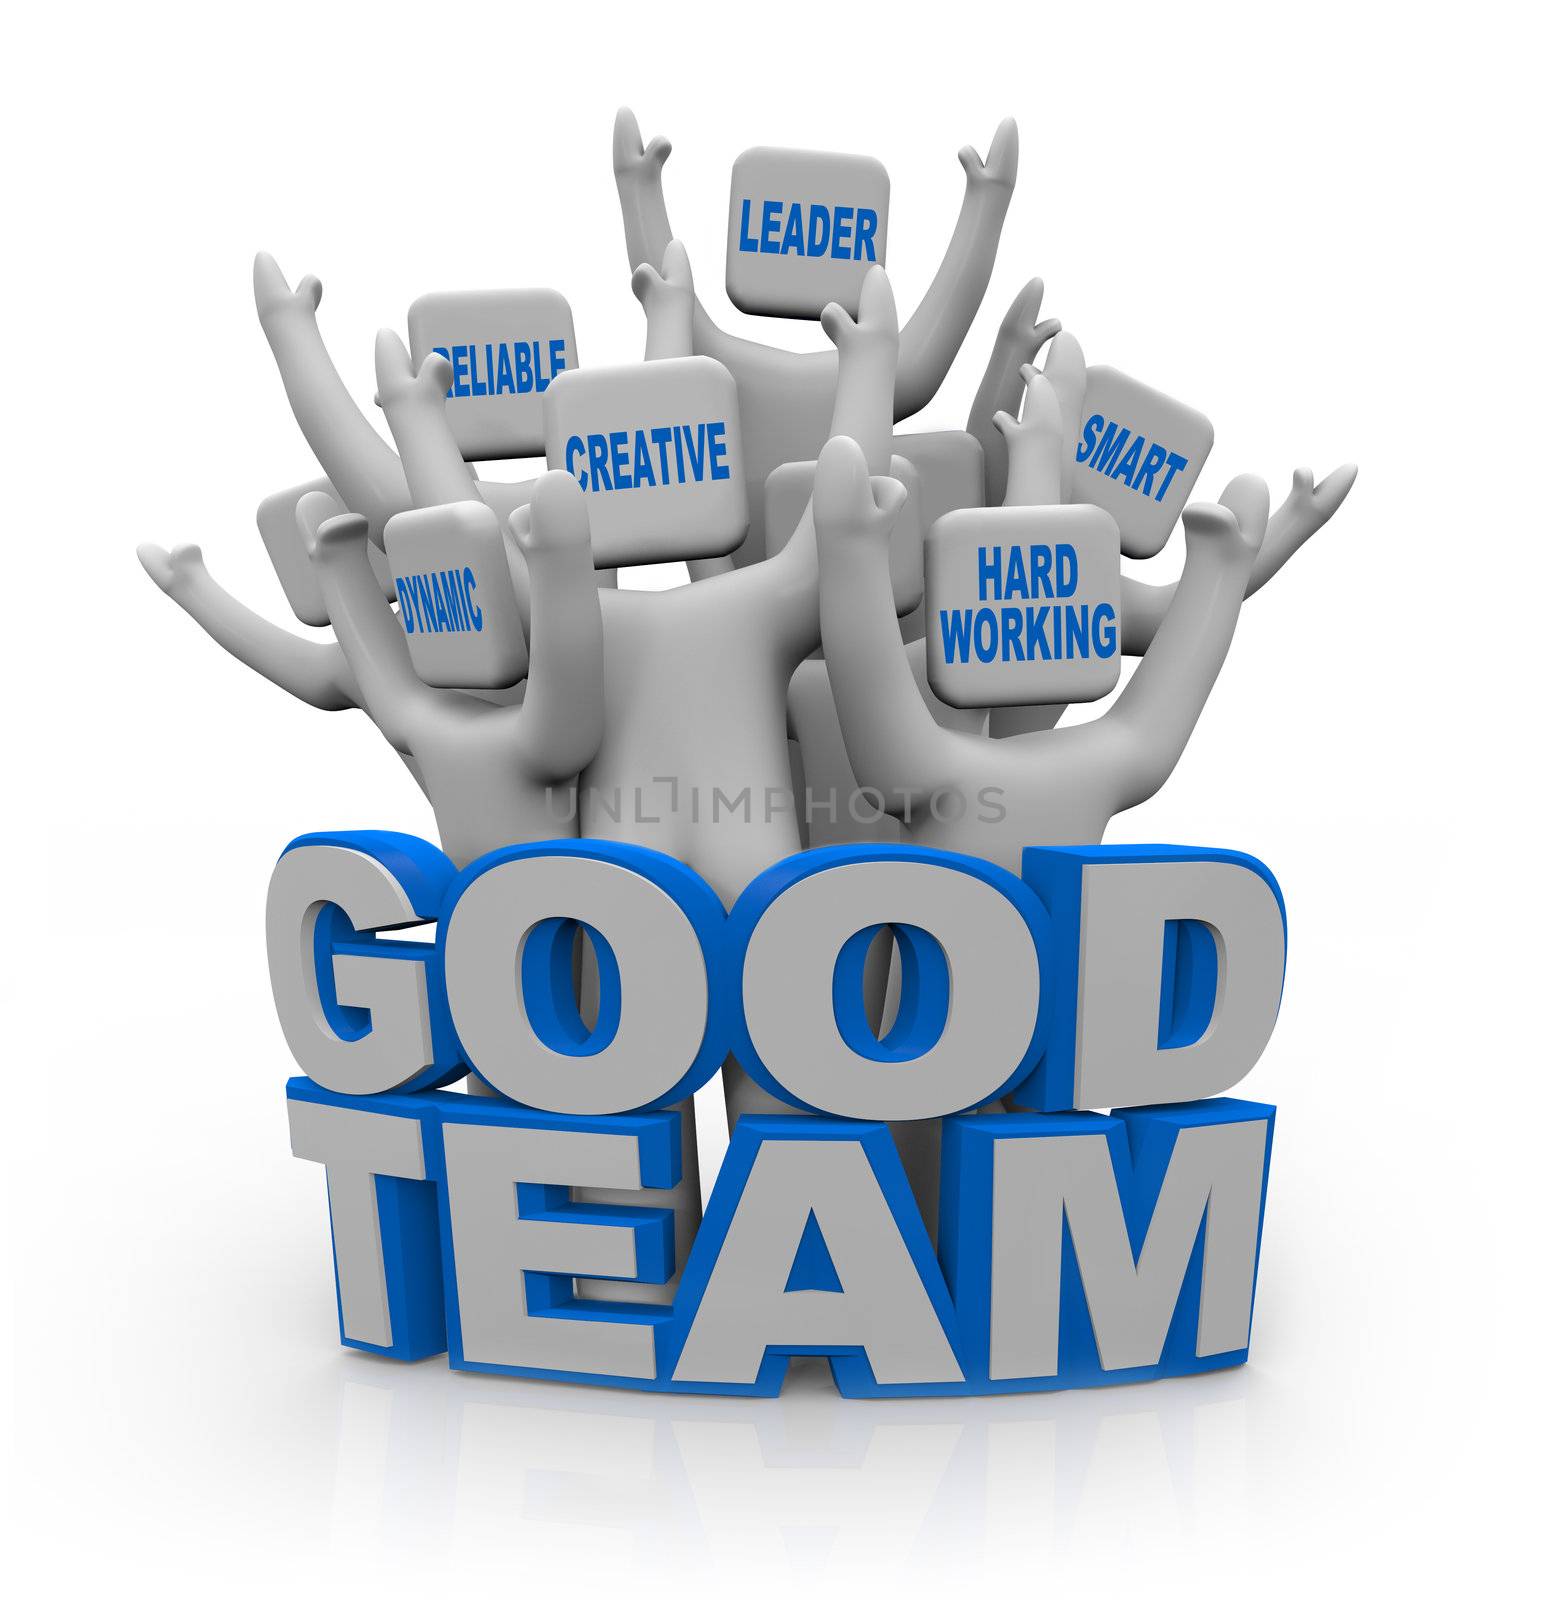 Good Team - People with Teamwork Qualities by iQoncept